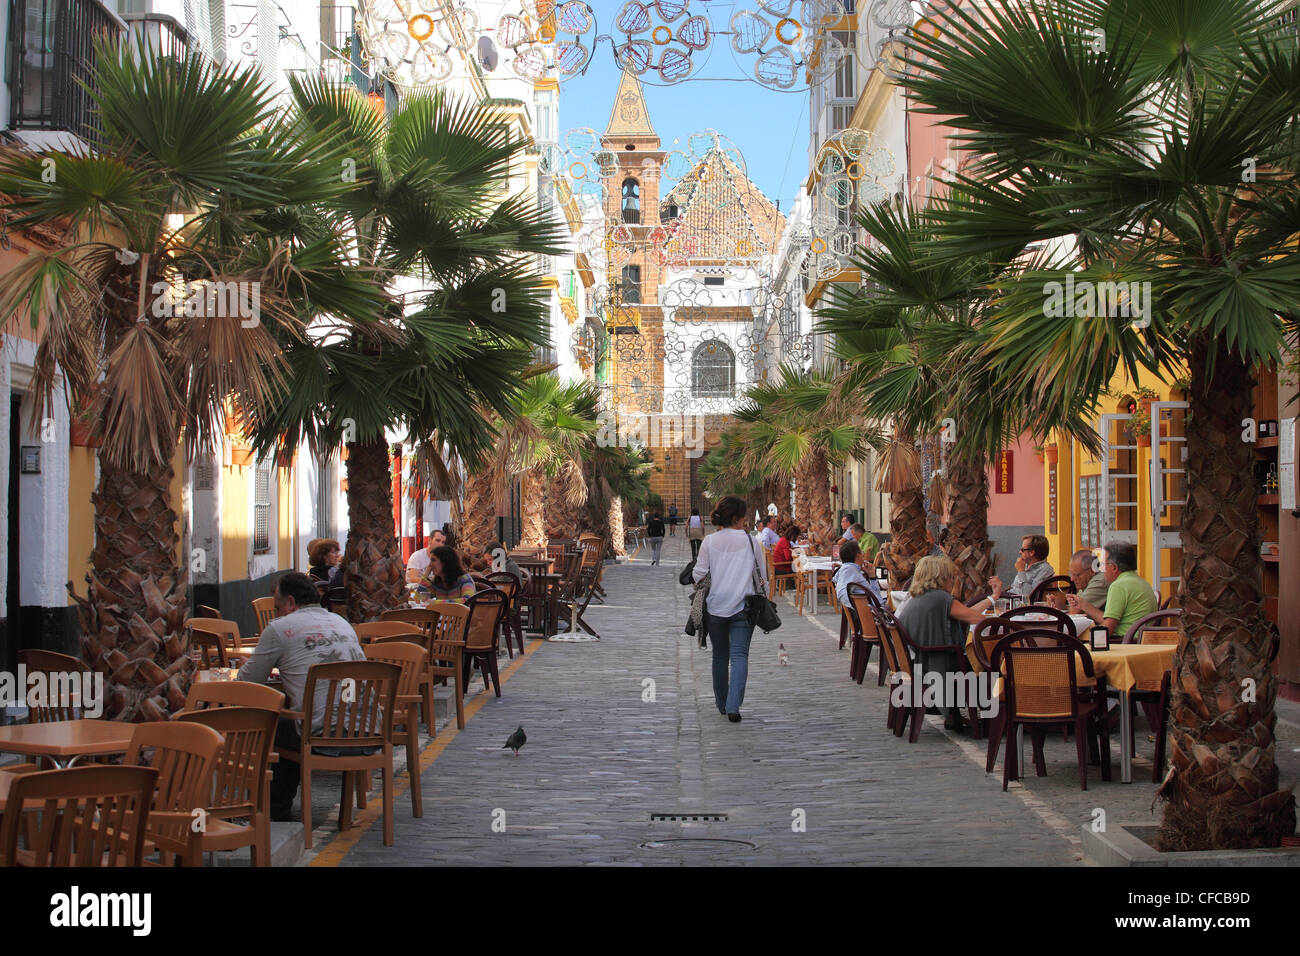 Alley in the old town of Cadiz, Cadiz, province Cadiz, Andalusia, Spain Stock Photo